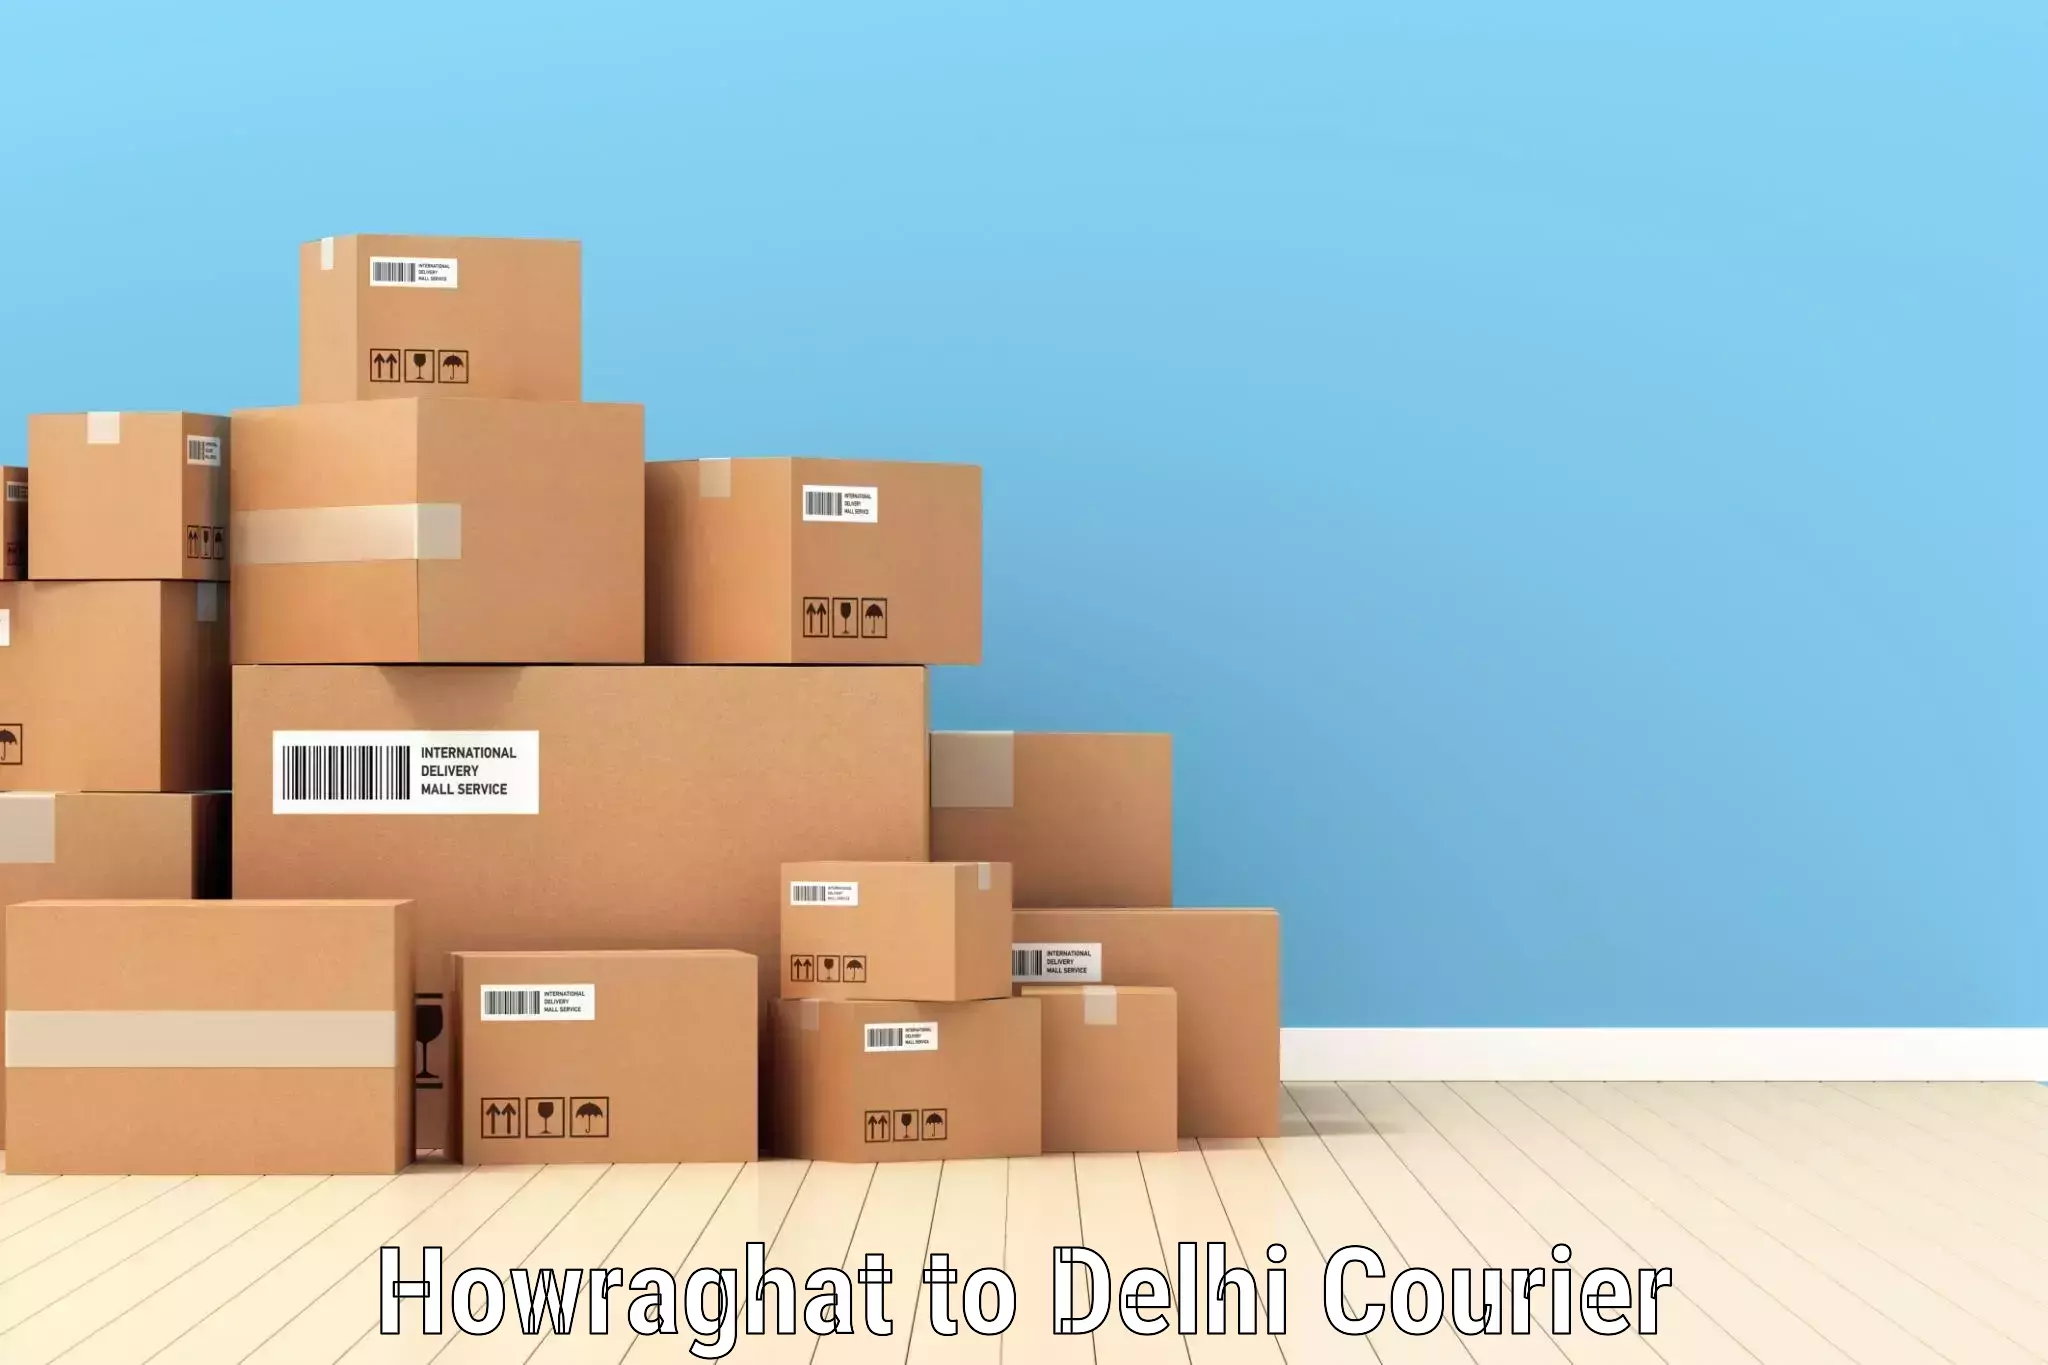 Commercial shipping rates Howraghat to Jamia Hamdard New Delhi